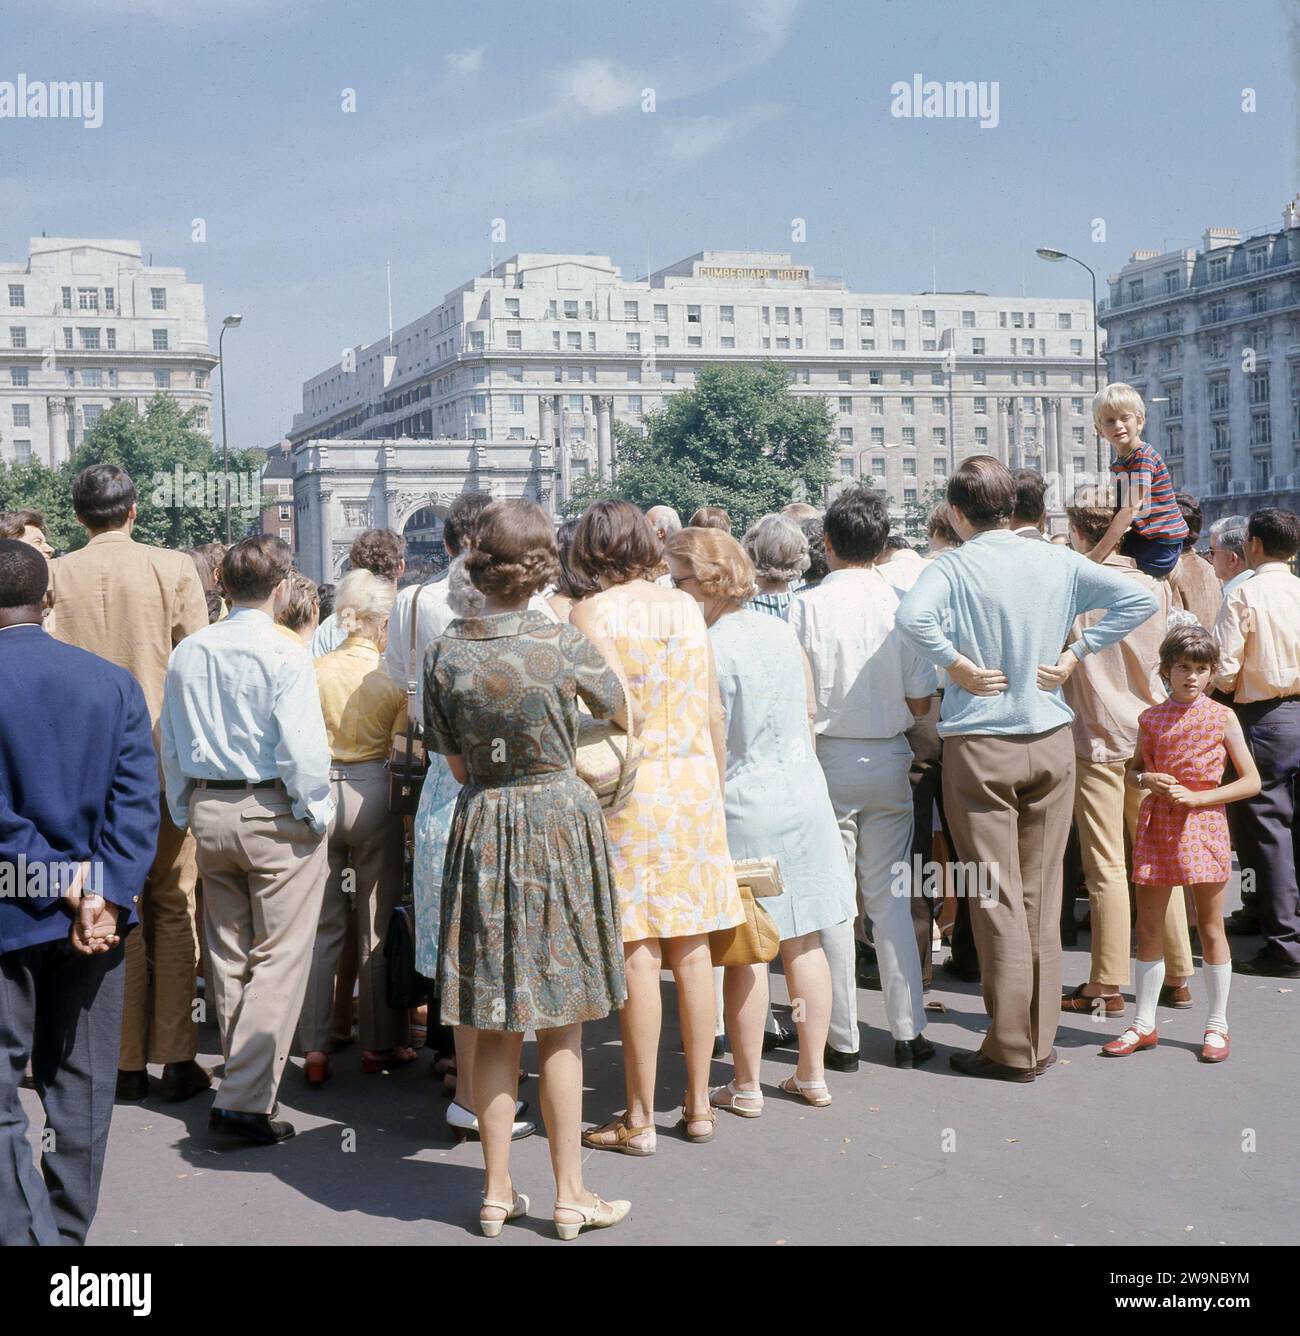 1960s, historical, summertime and a group of people gathered listening to a speaker at  what is known as 'speakers corner', a part of Hyde Park, in Central London. By a 1872 act of Parliament, an area was set aside for public speaking or 'free speech', most usually on a Sunday morning. Stock Photo